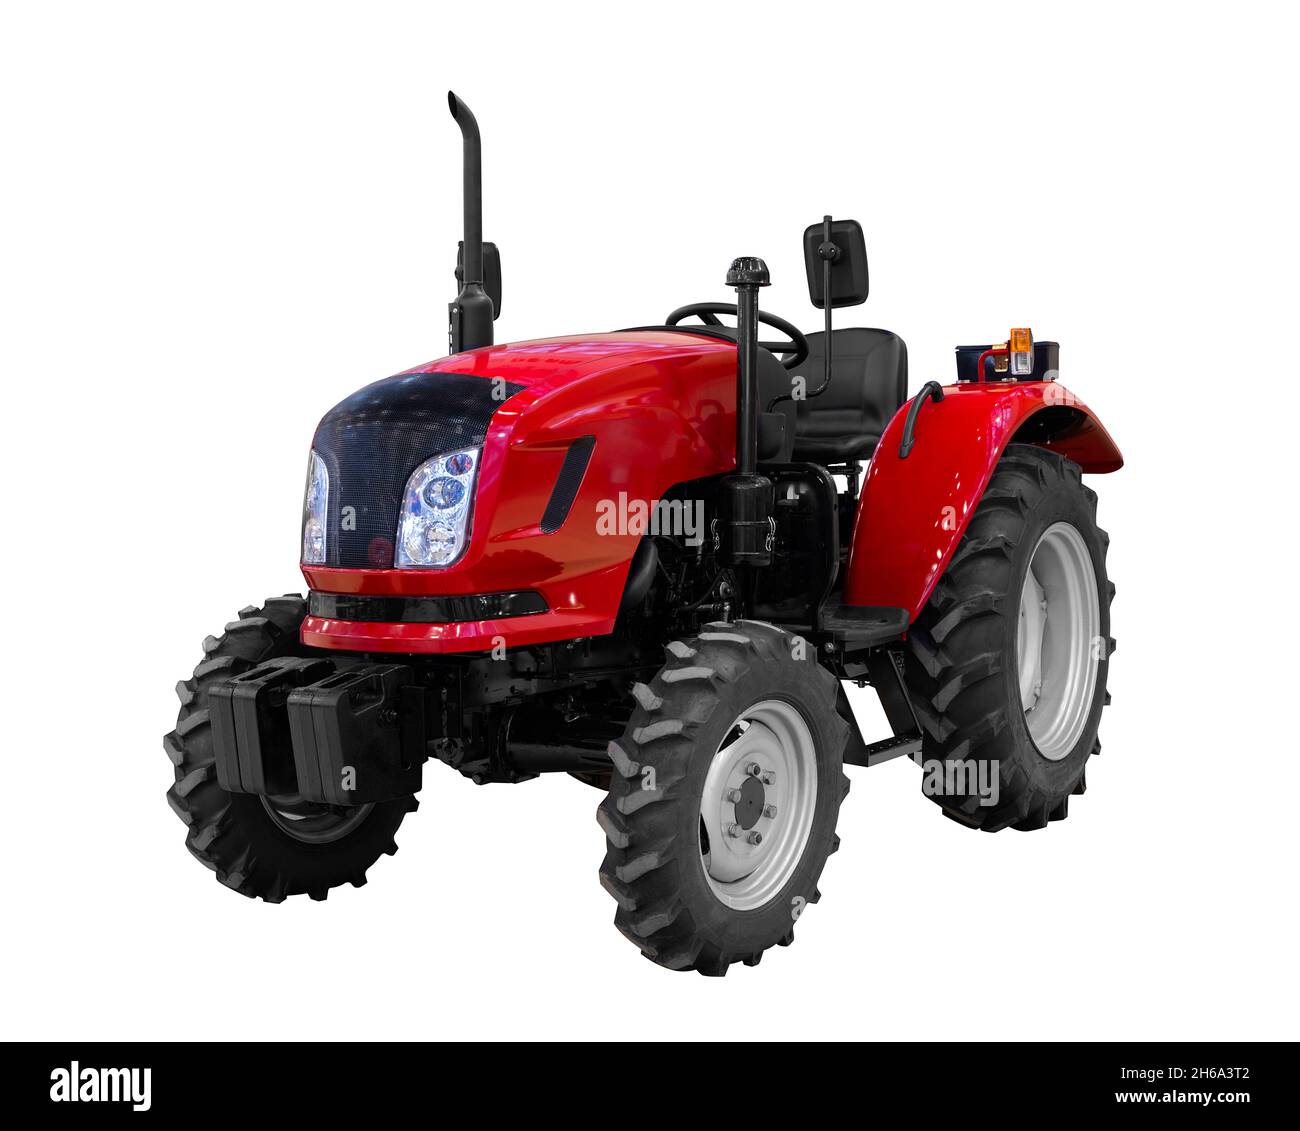 New tractor on white background Stock Photo